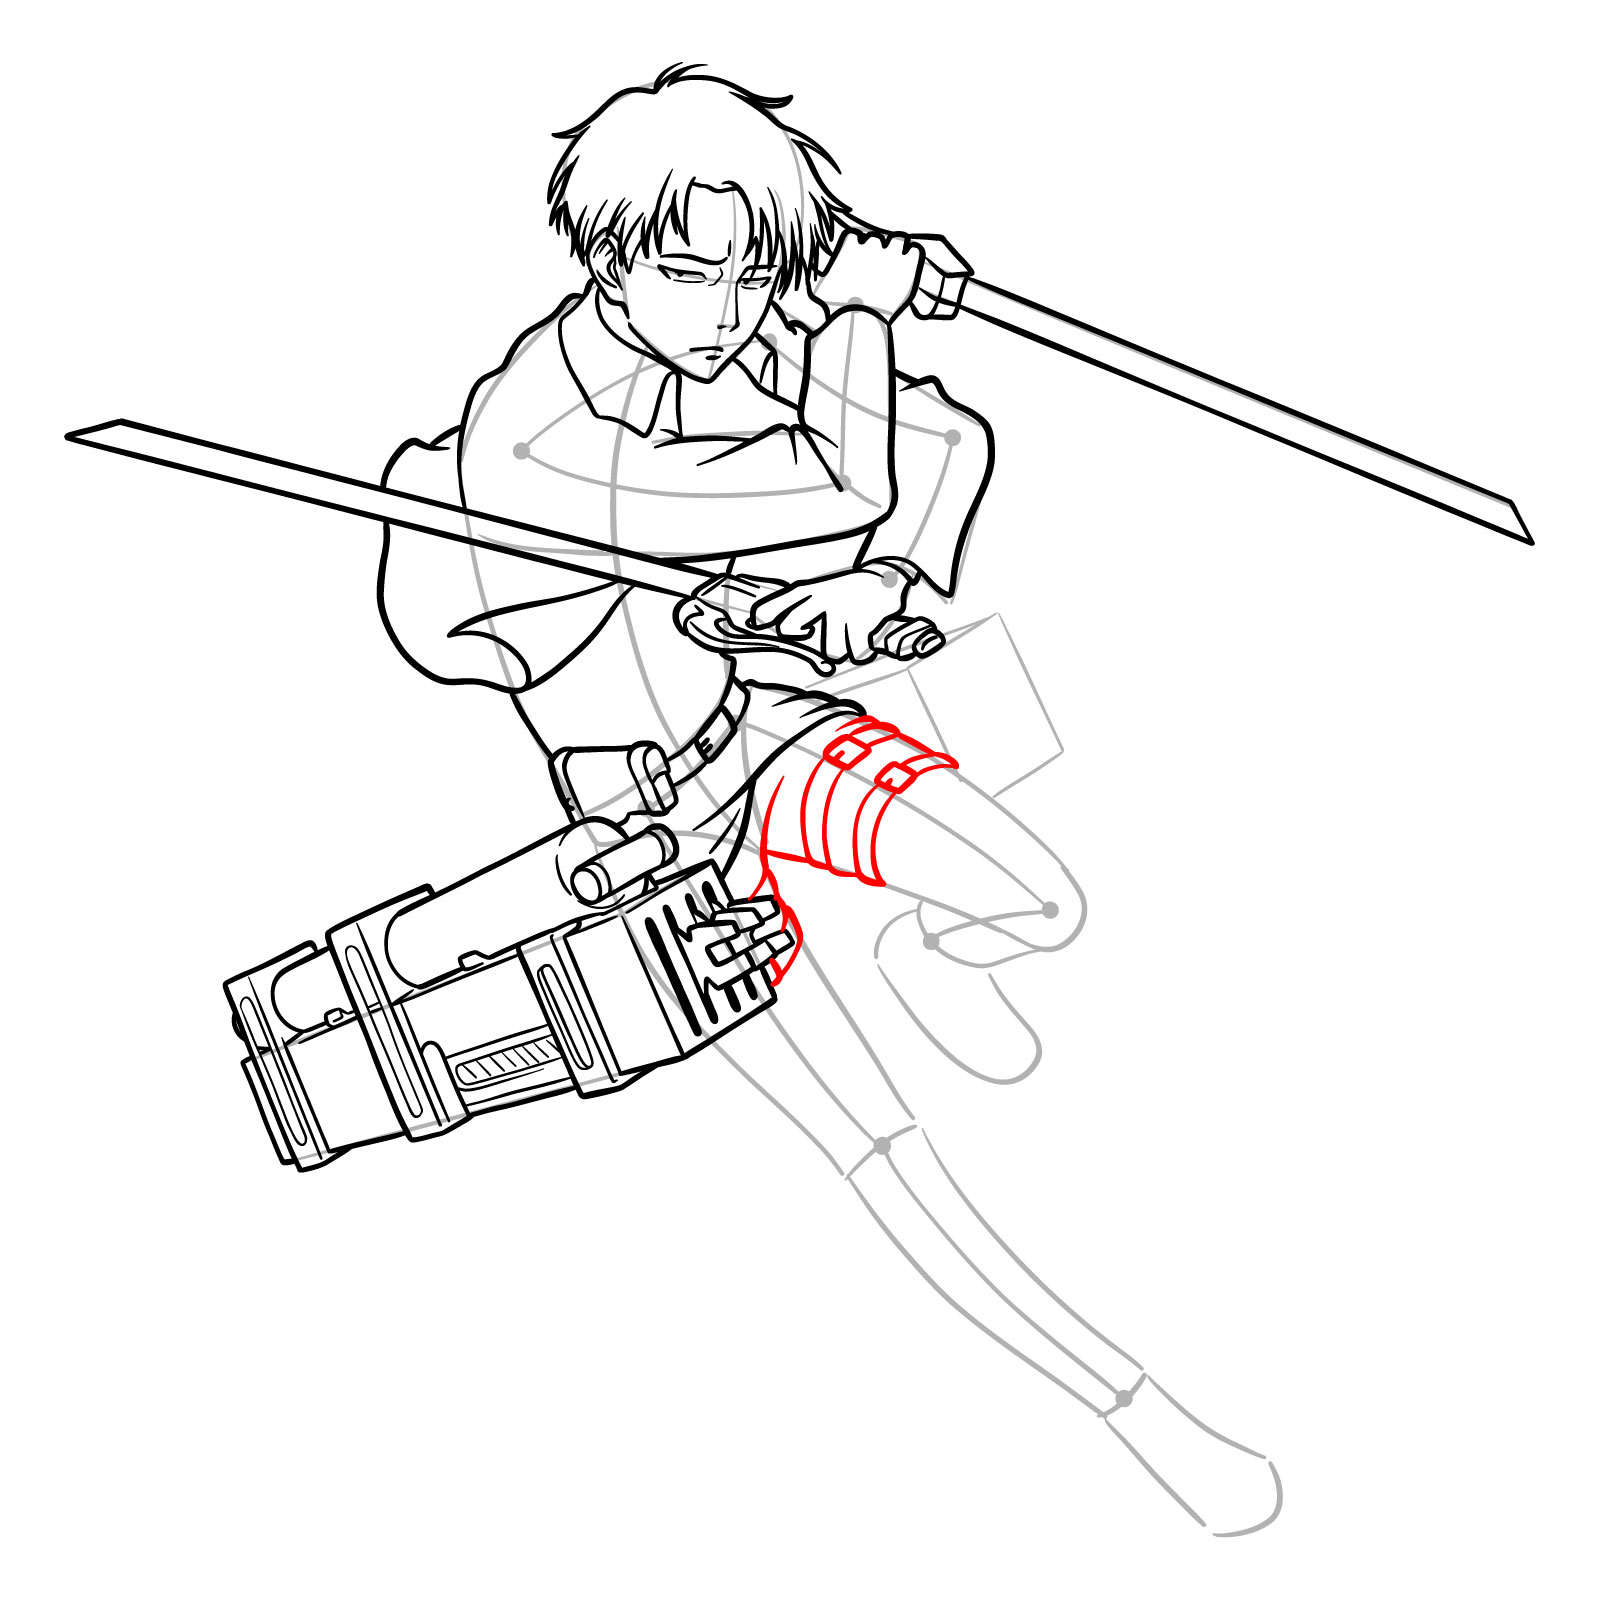 Step-by-step drawing of Captain Levi's legs and uniform details - step 27